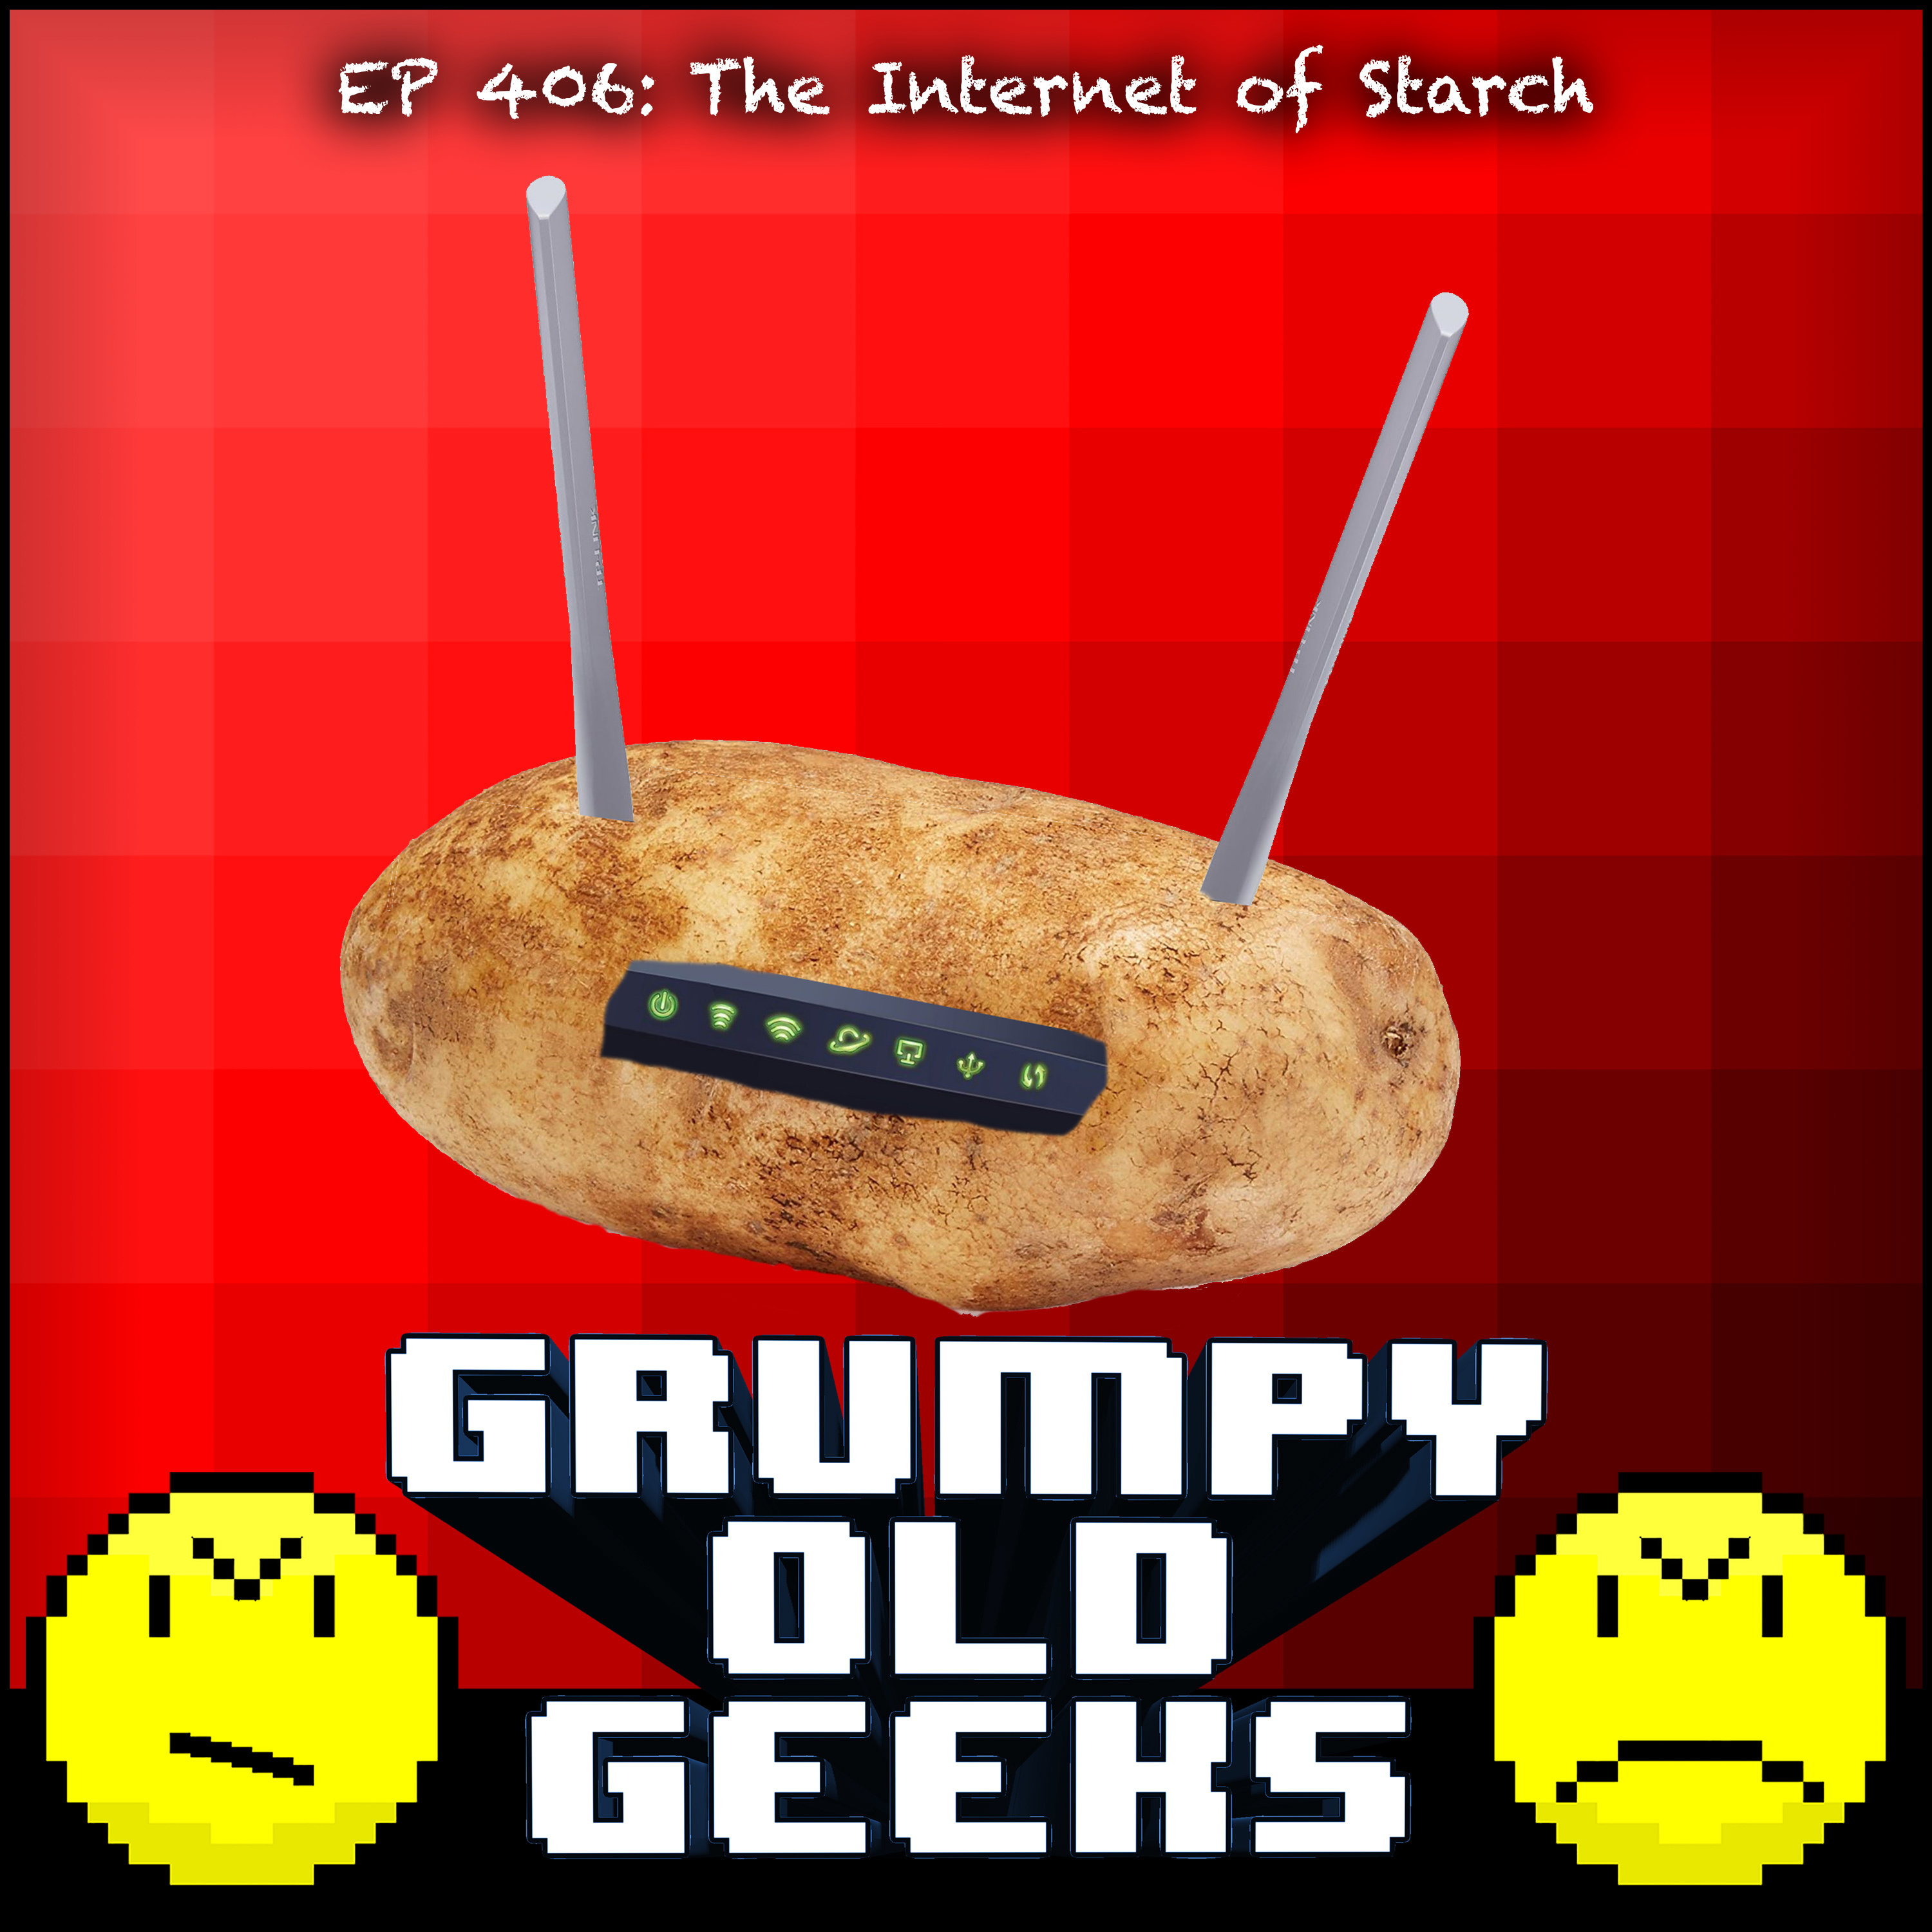 406: The Internet of Starch Image